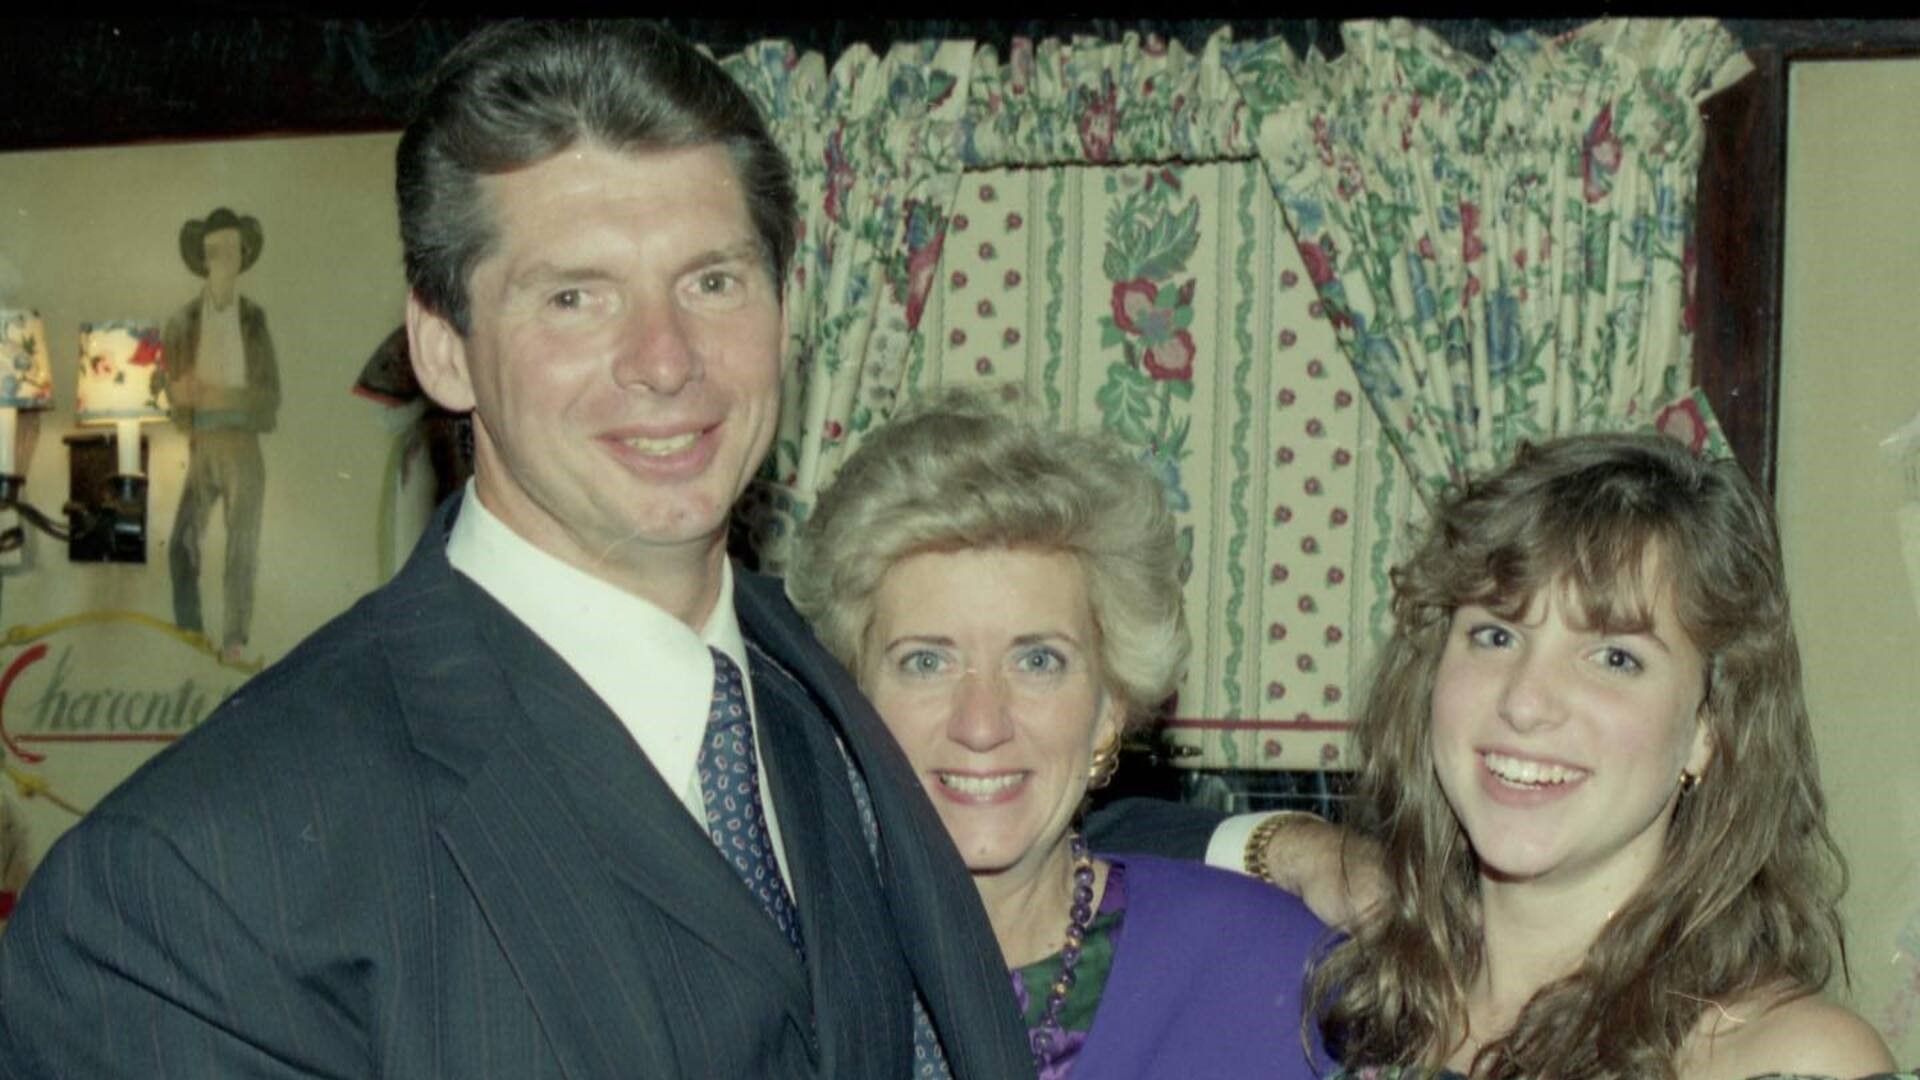 Throwback photo of three members of The McMahon Family - Vince, Linda, Stephanie